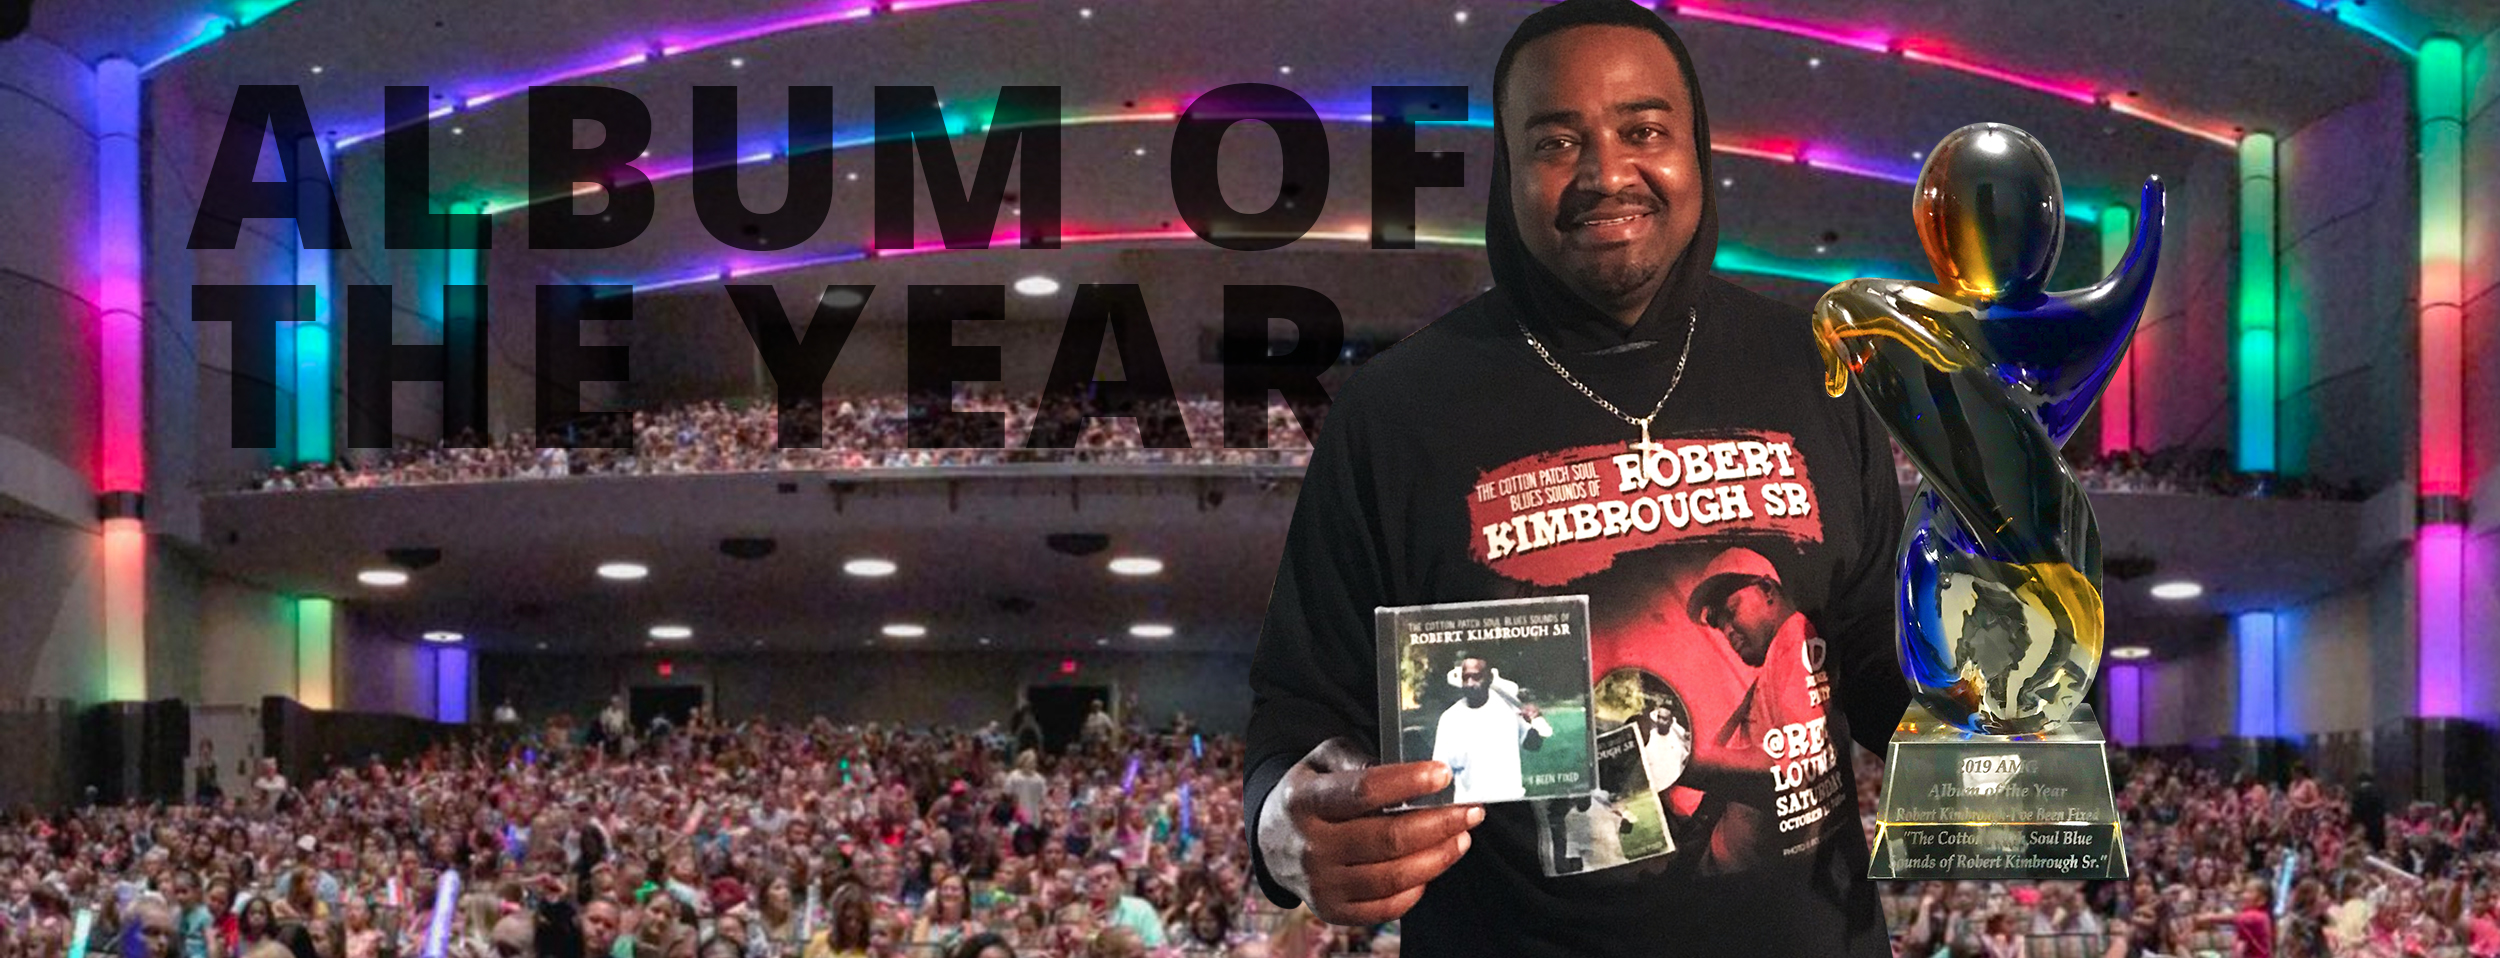 Robert Takes Home AMG Album of the Year Award